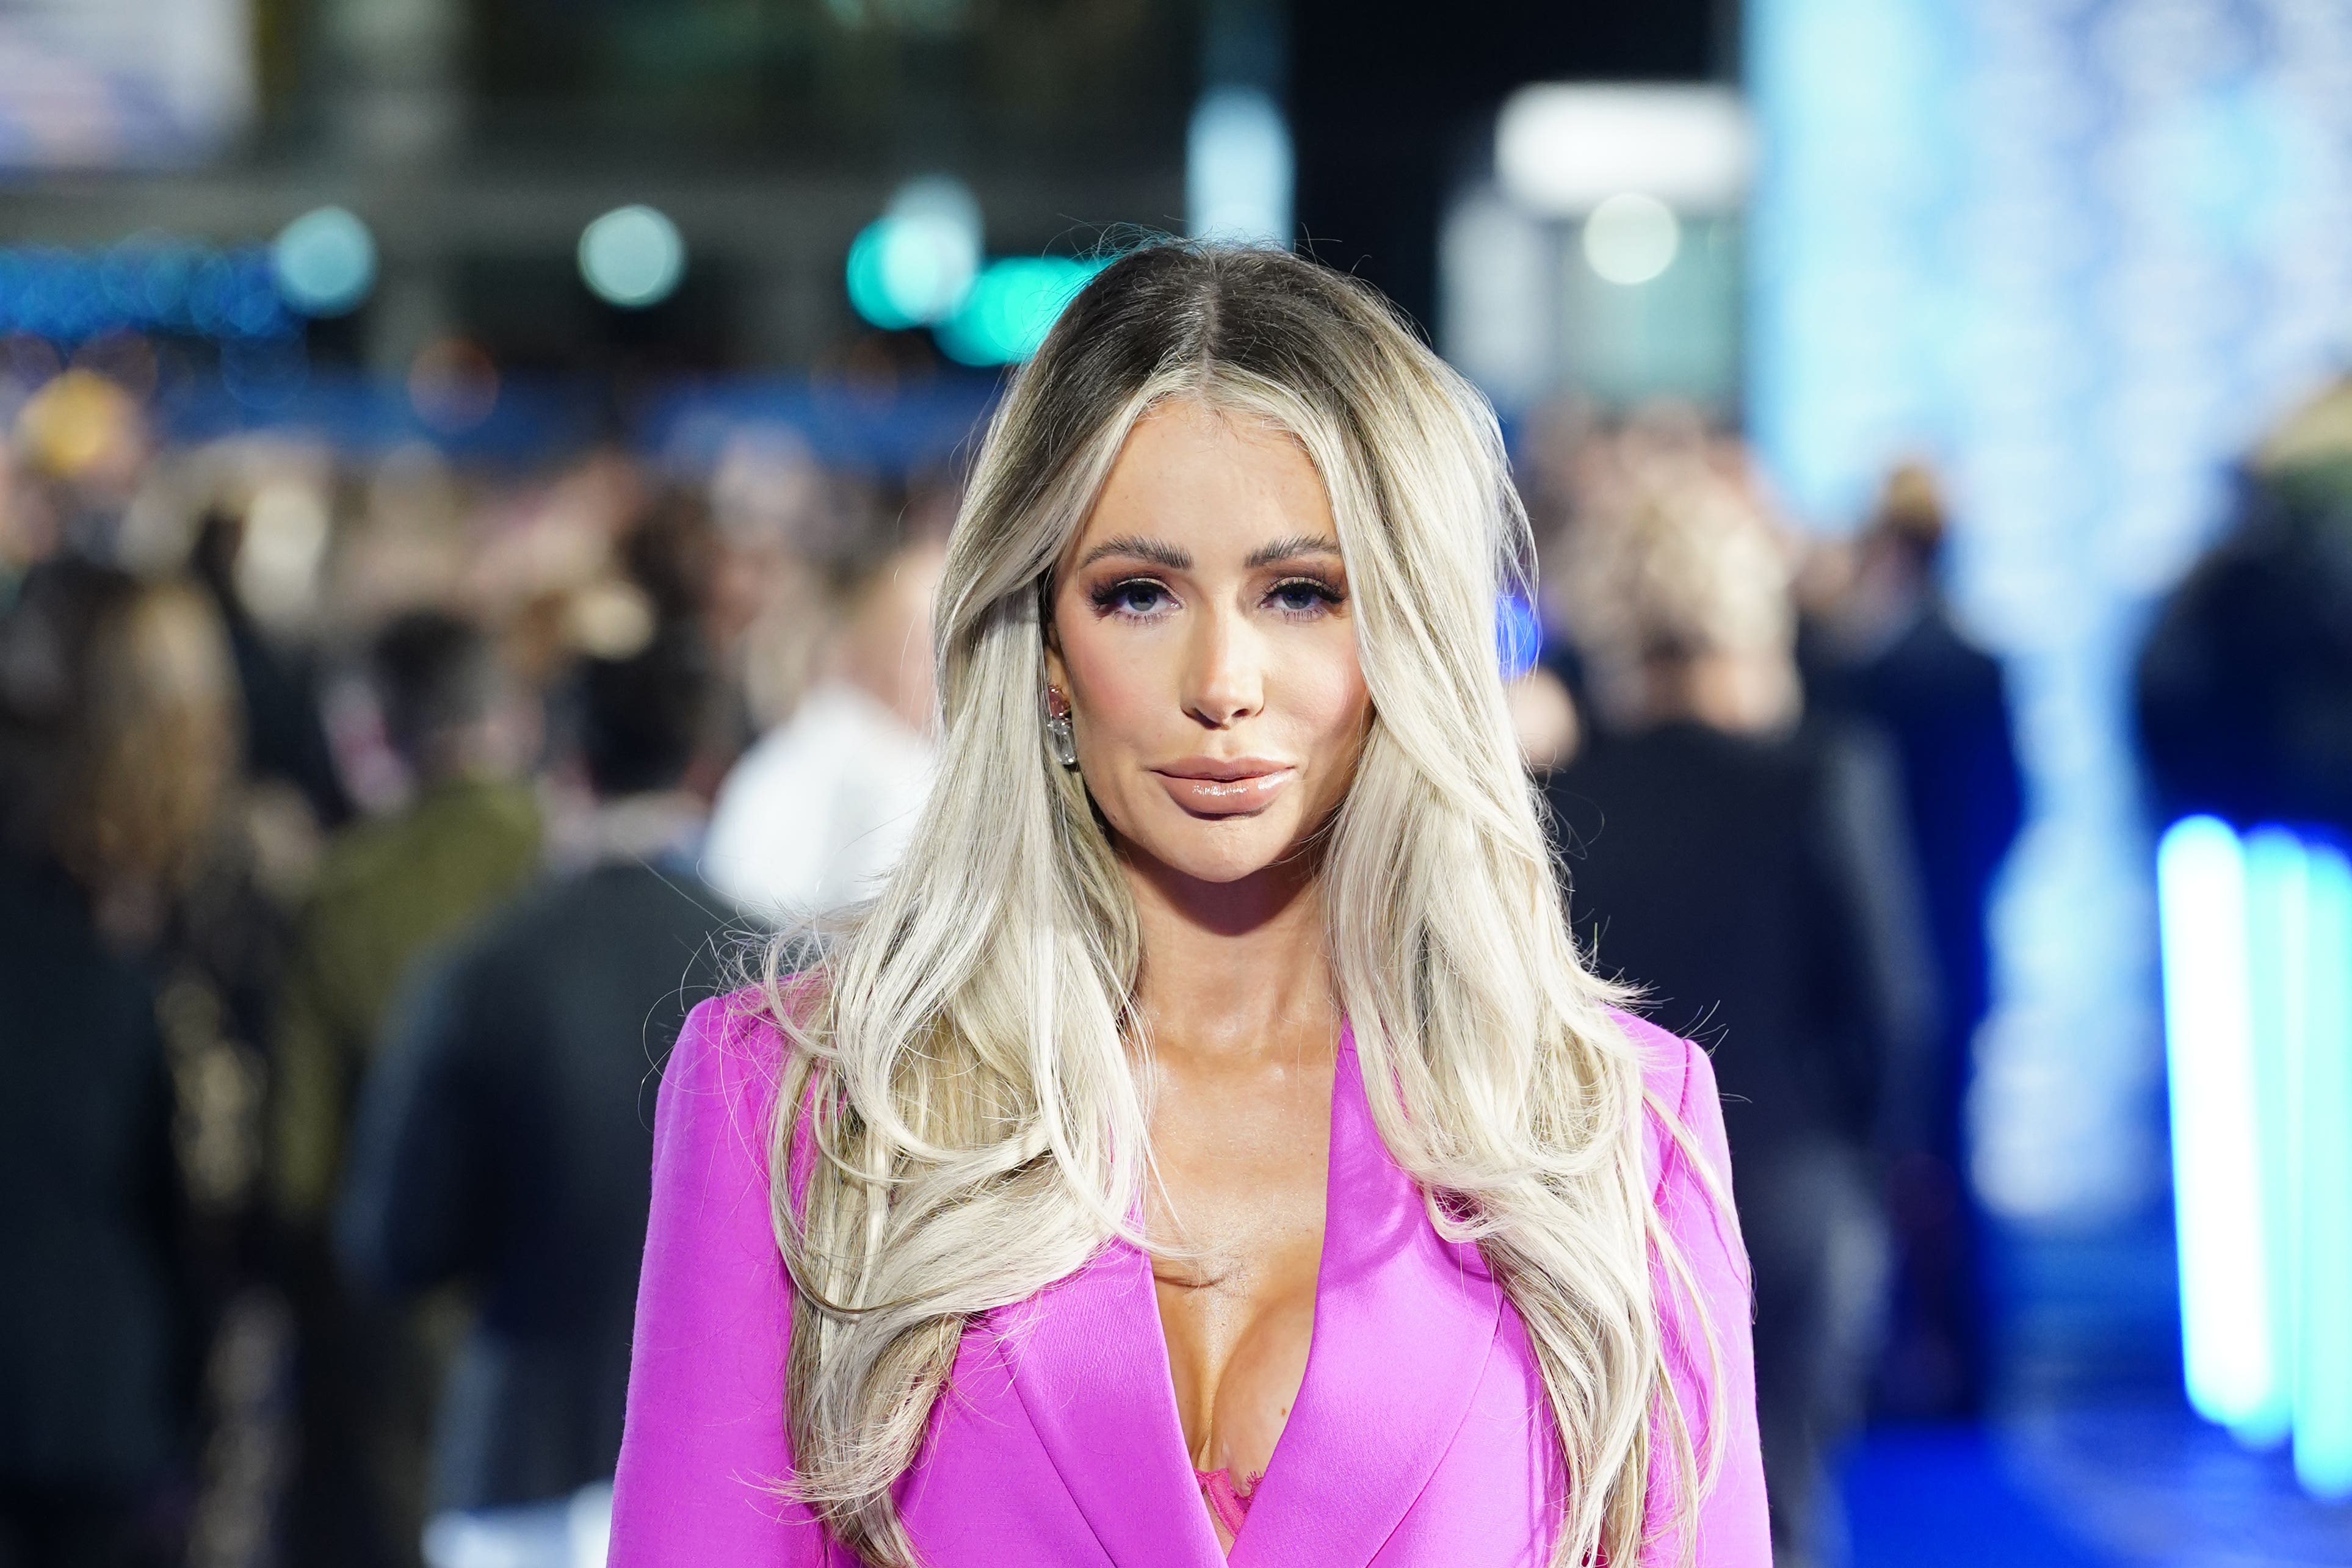 Olivia Attwood says she is enjoying watching Im A Celebrity The Independent image